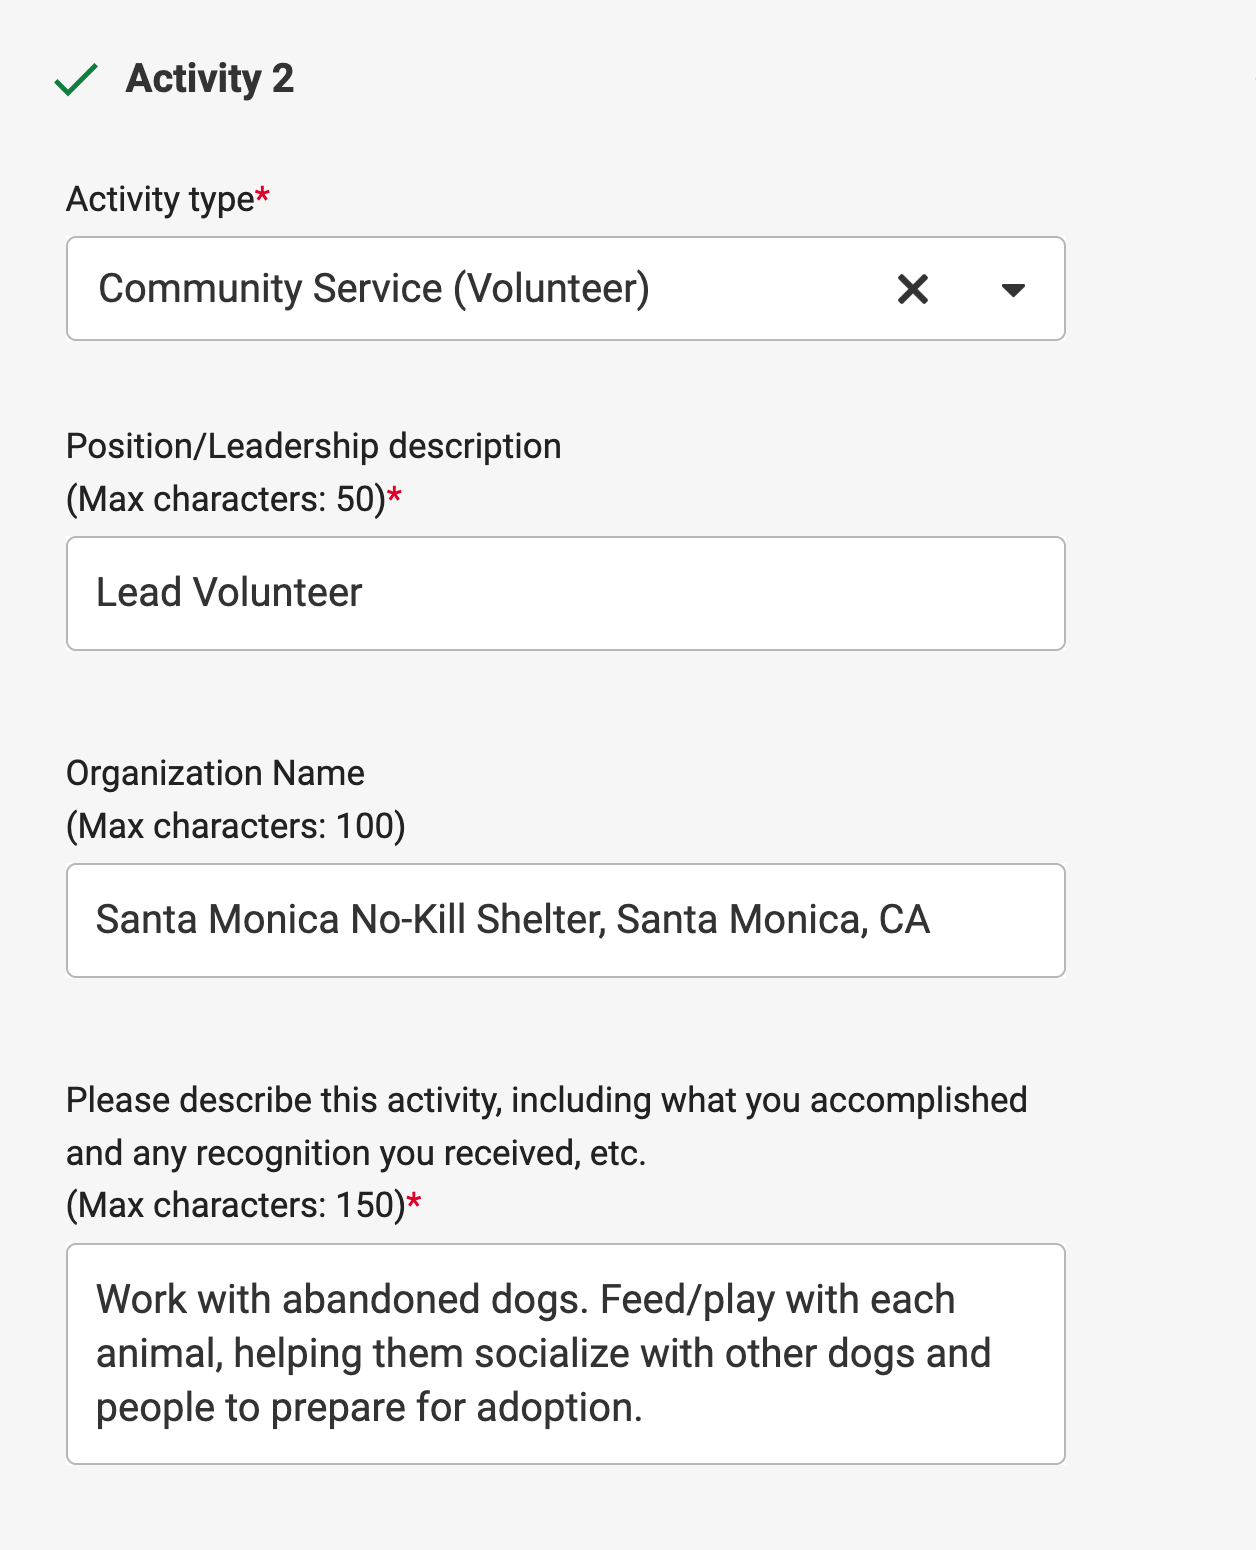 Activity example 2: Activity type: Community Service. Position field: Lead Volunteer. Organization name field: Santa Monica No-Kill Shelter, Santa Monica, CA. Describe this activity field: Work with abandoned dogs. Feed/play with each animal, helping them socialize with other dogs and people to prepare for adoption.